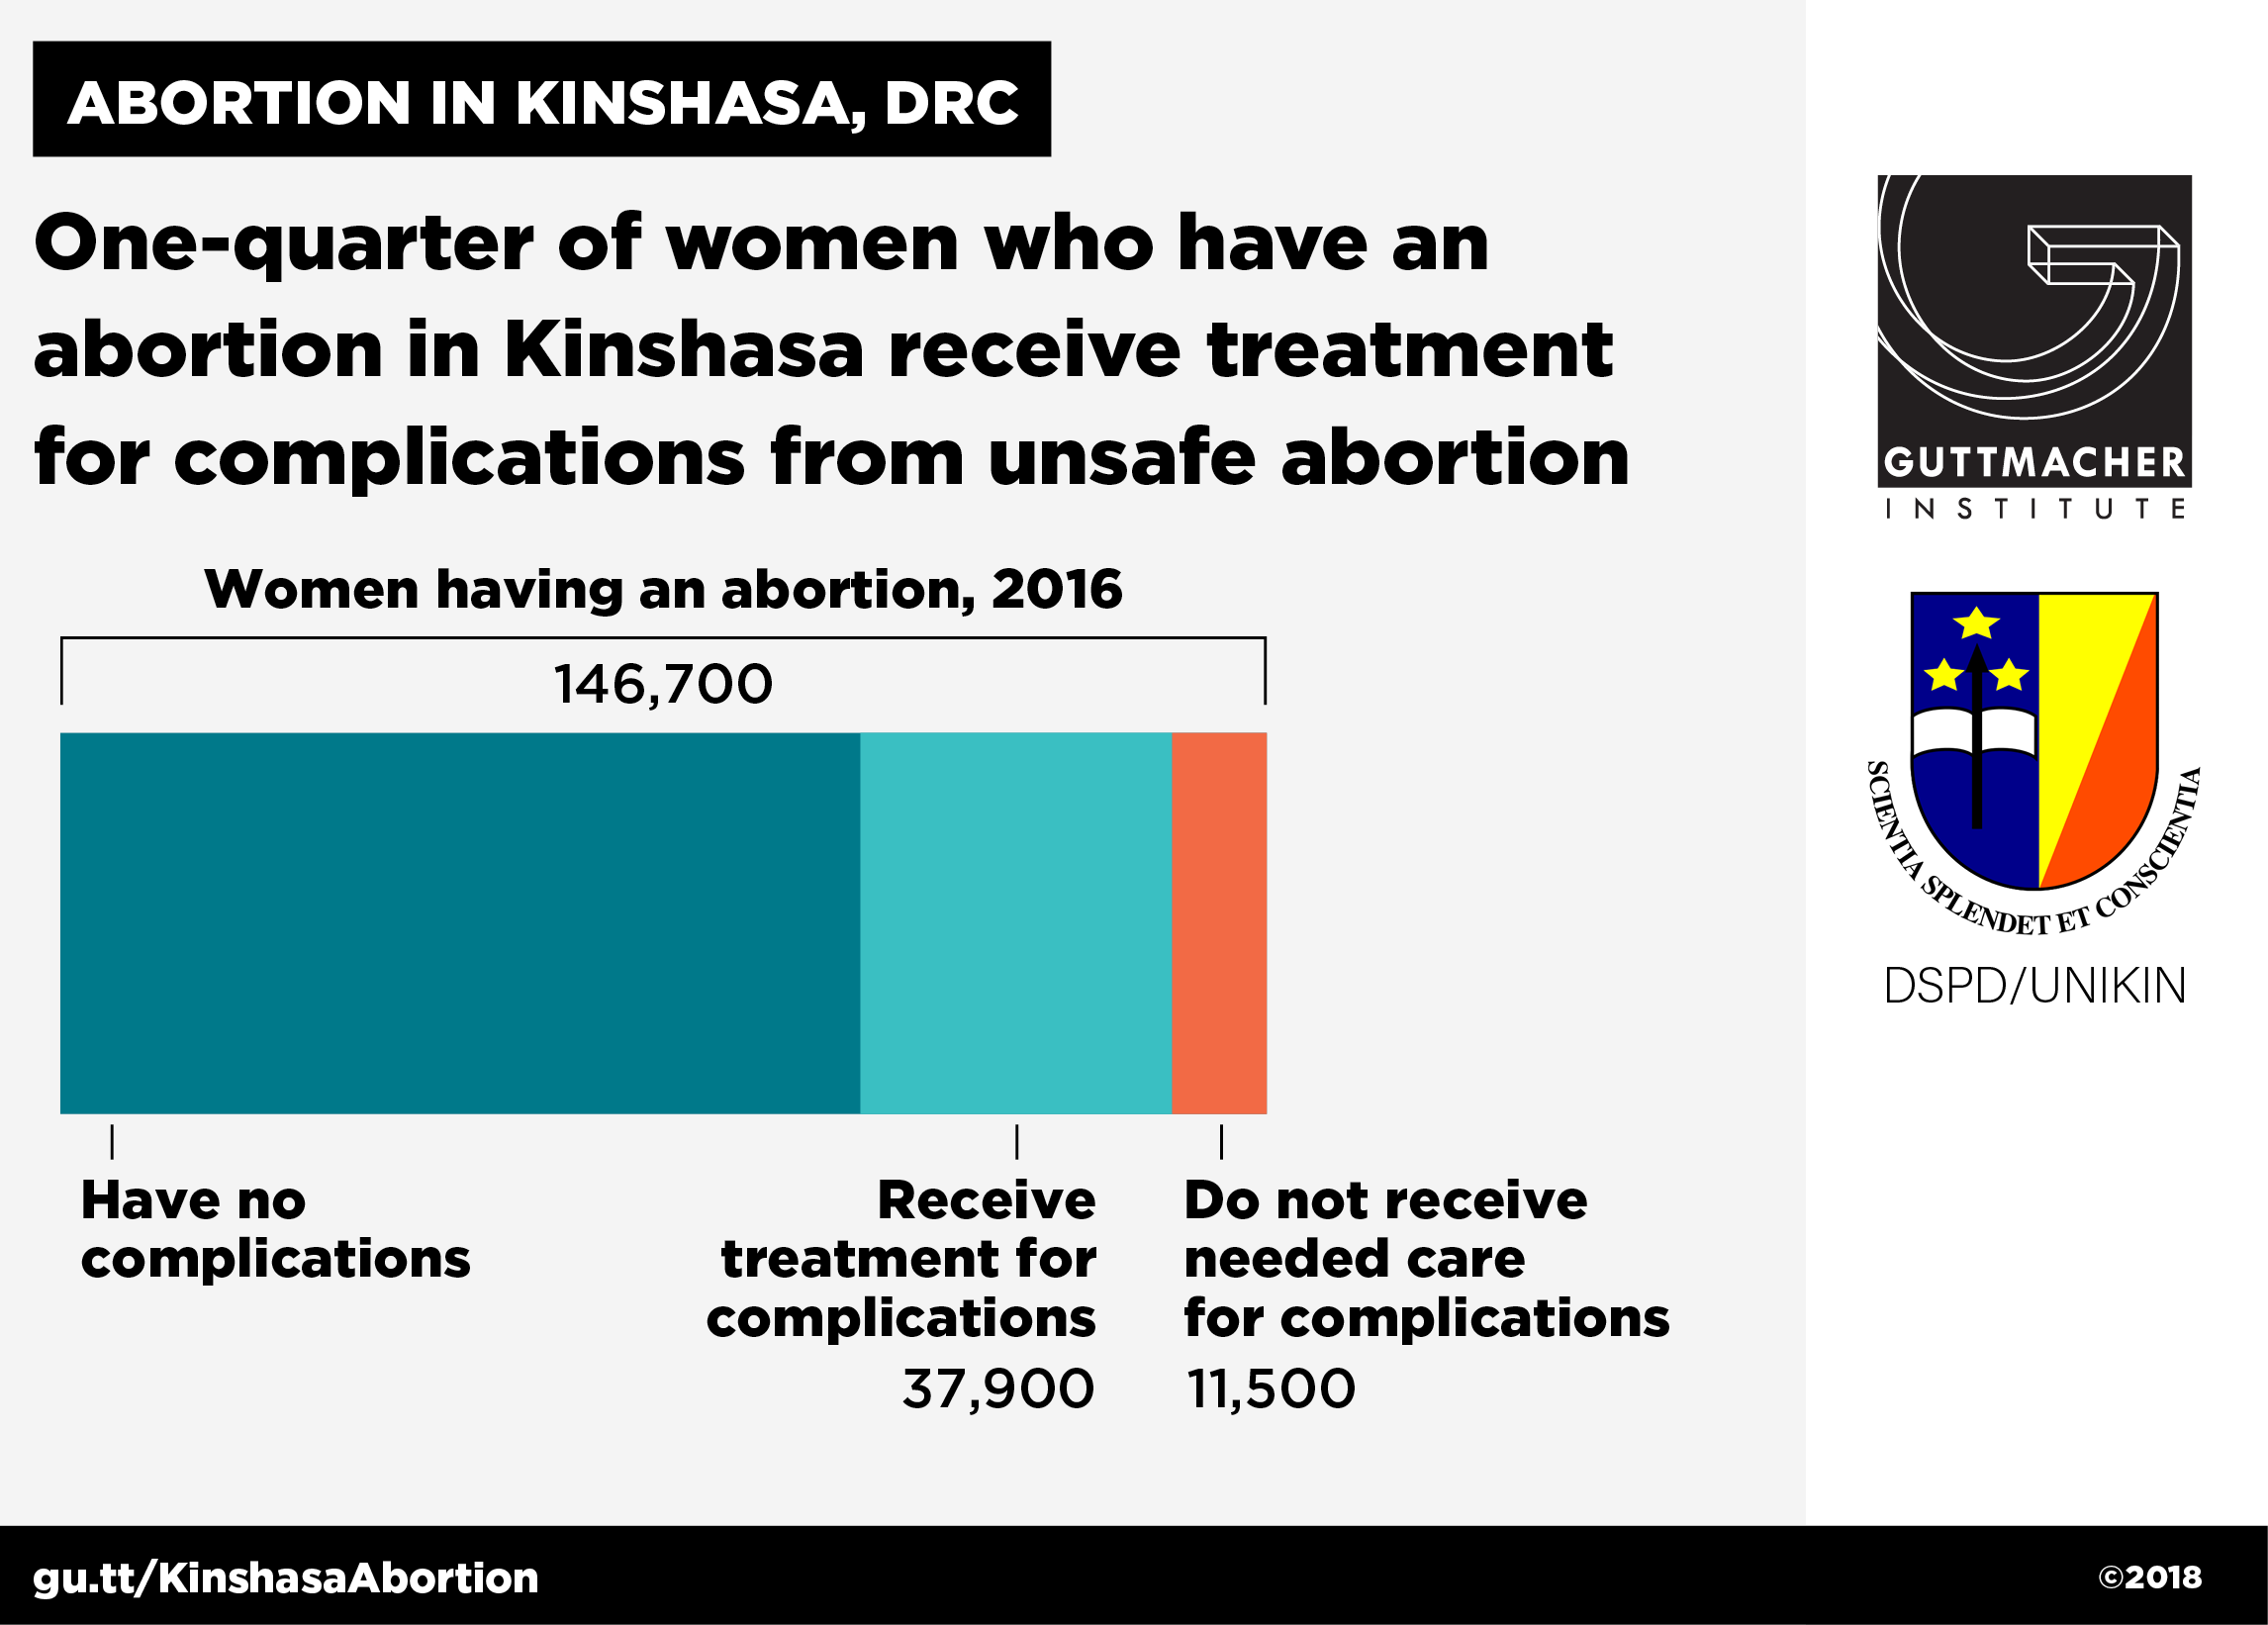 Graphic showing number of women who have an abortion in Kinshasa who receive treatment for complications from unsafe abortion in 2016